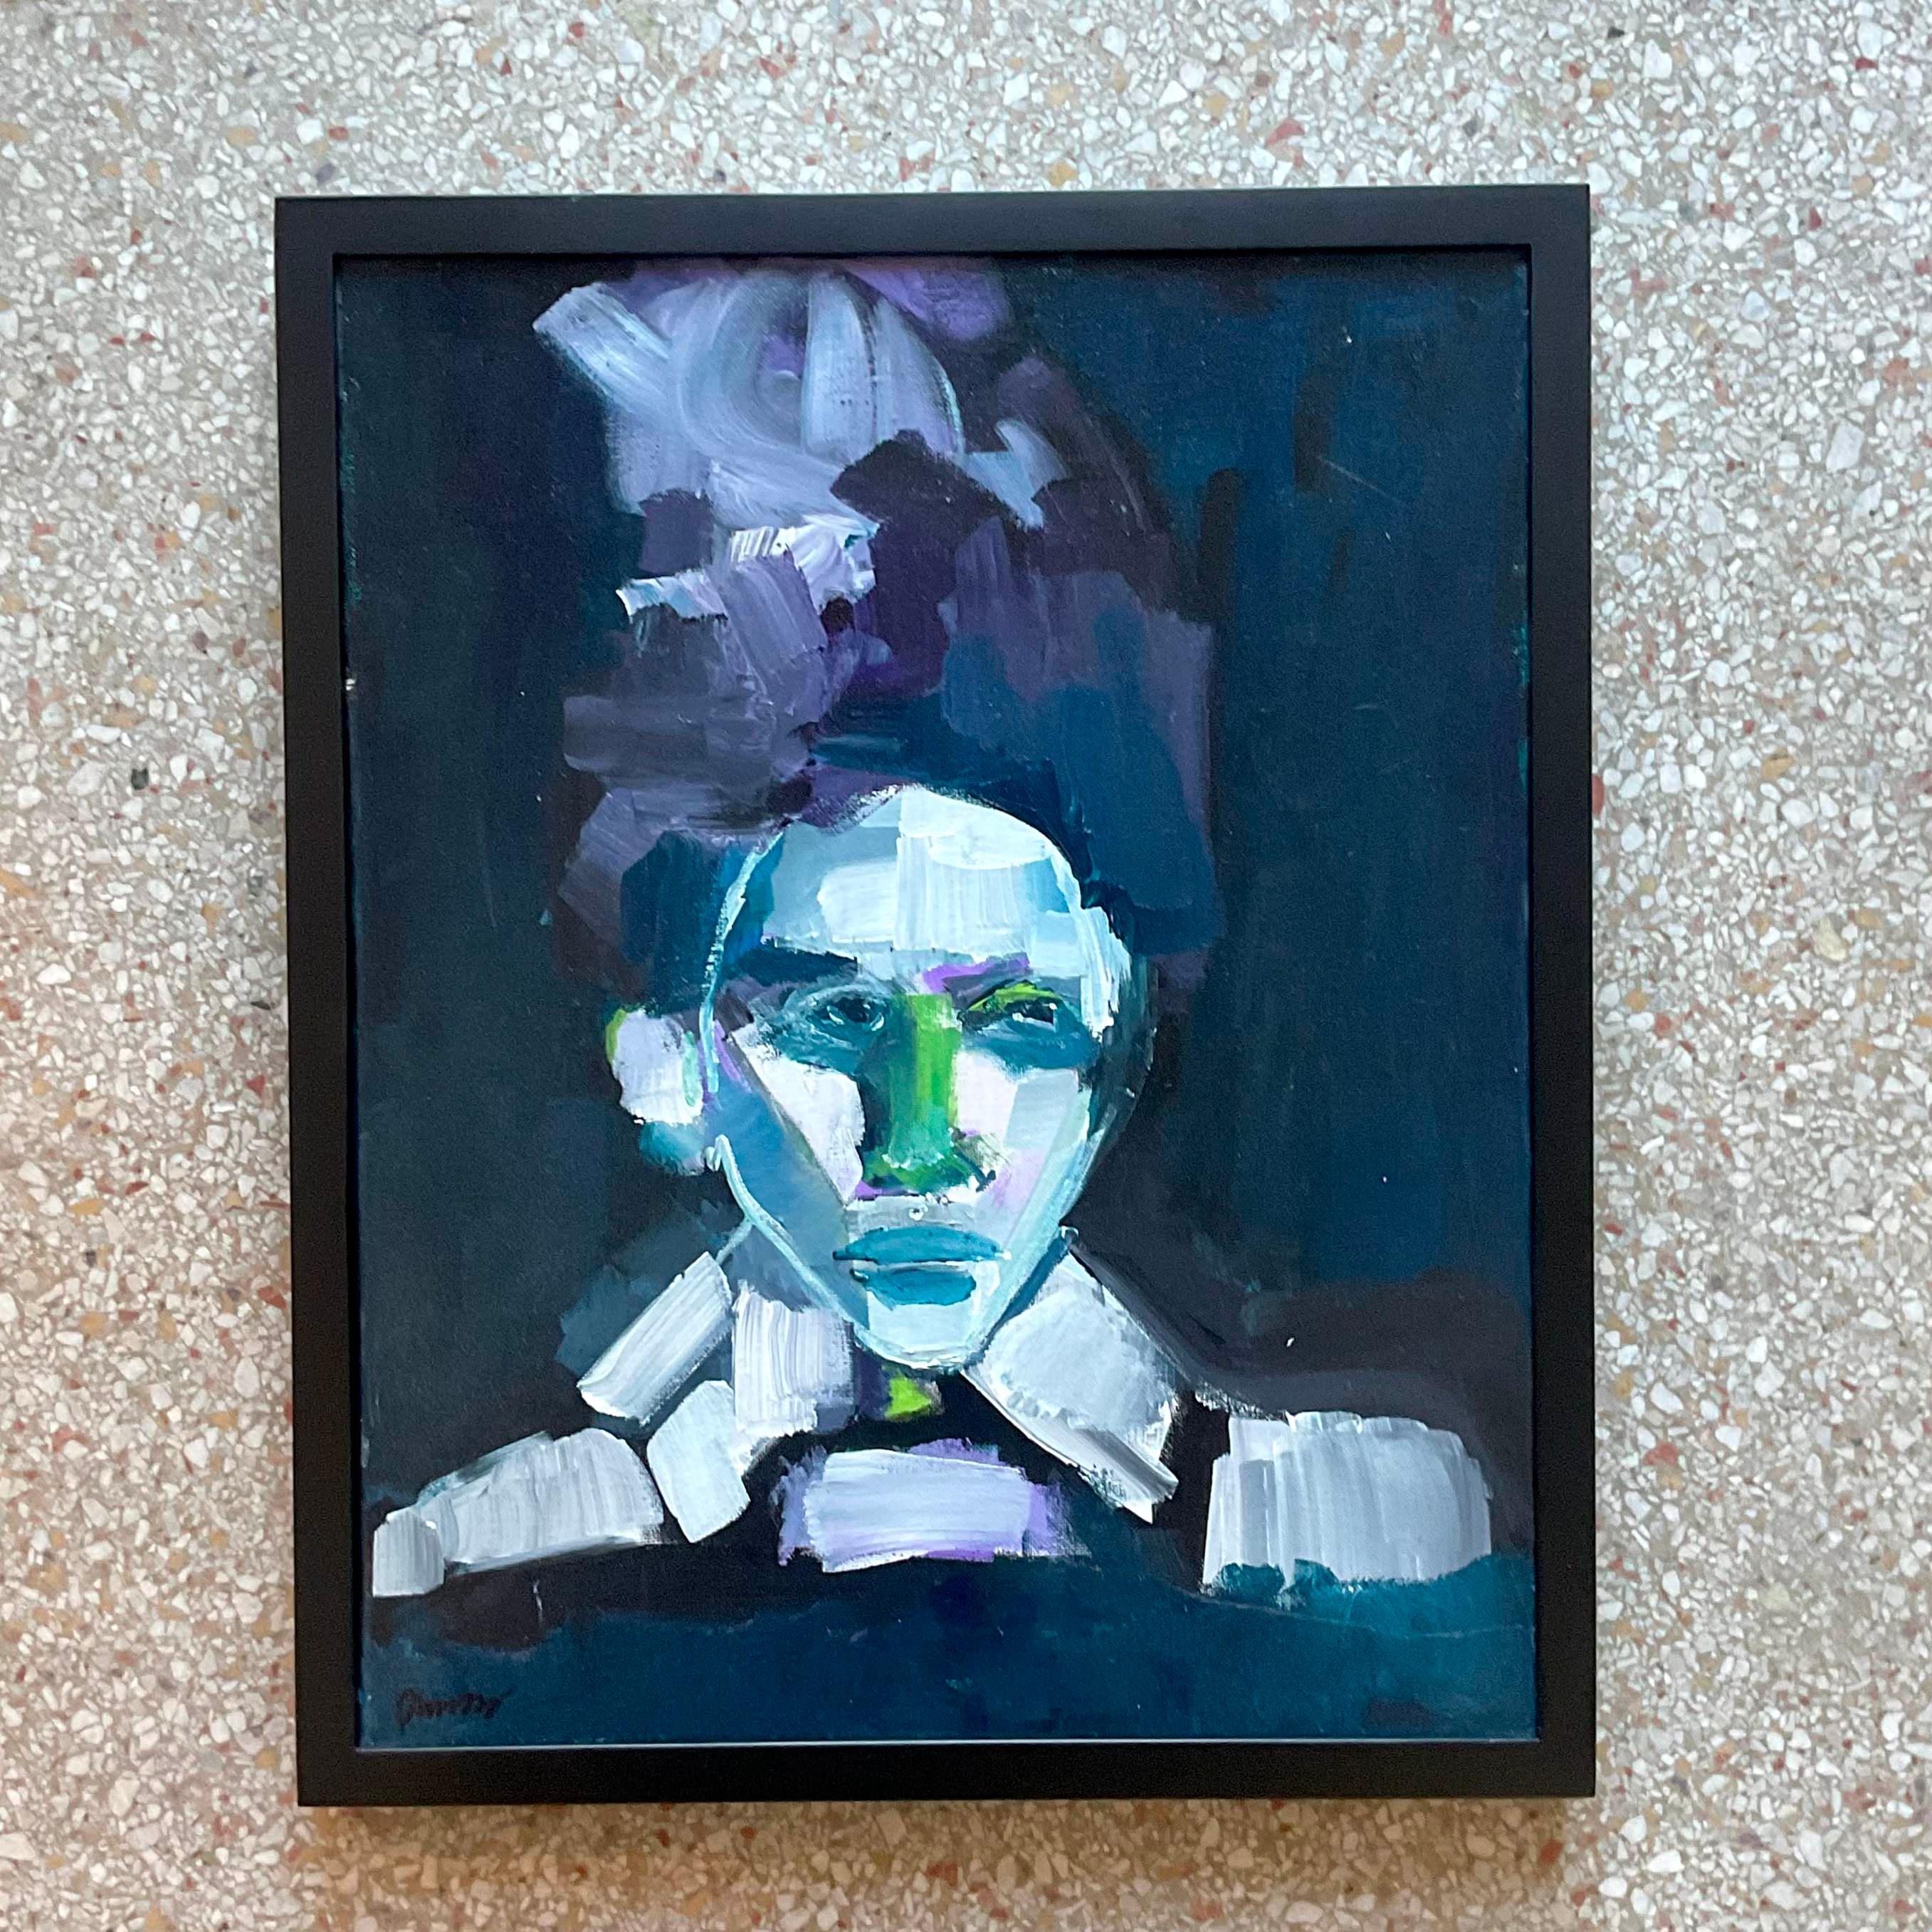 Mid-Century Modern Vintage Early 21st Century Abstract Portrait In Blues-Framed And Signed For Sale